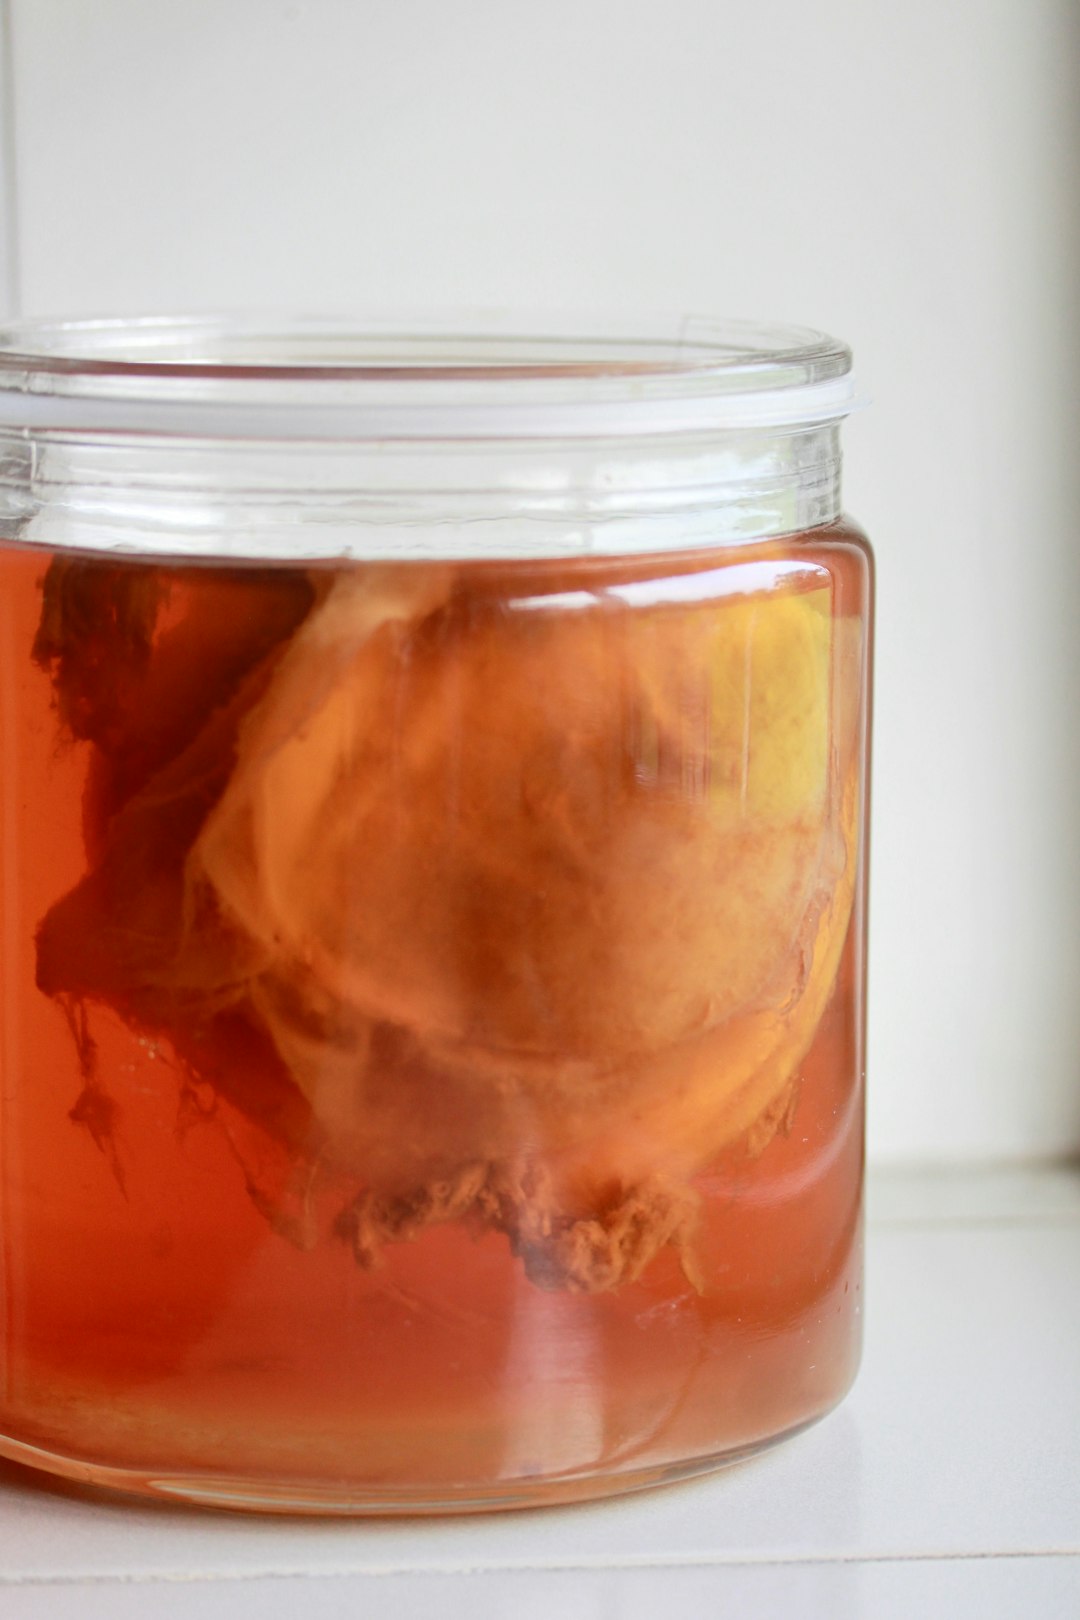 My huge Kombucha scoby, home brewed, originally comes from Russia, kitchen, healthy